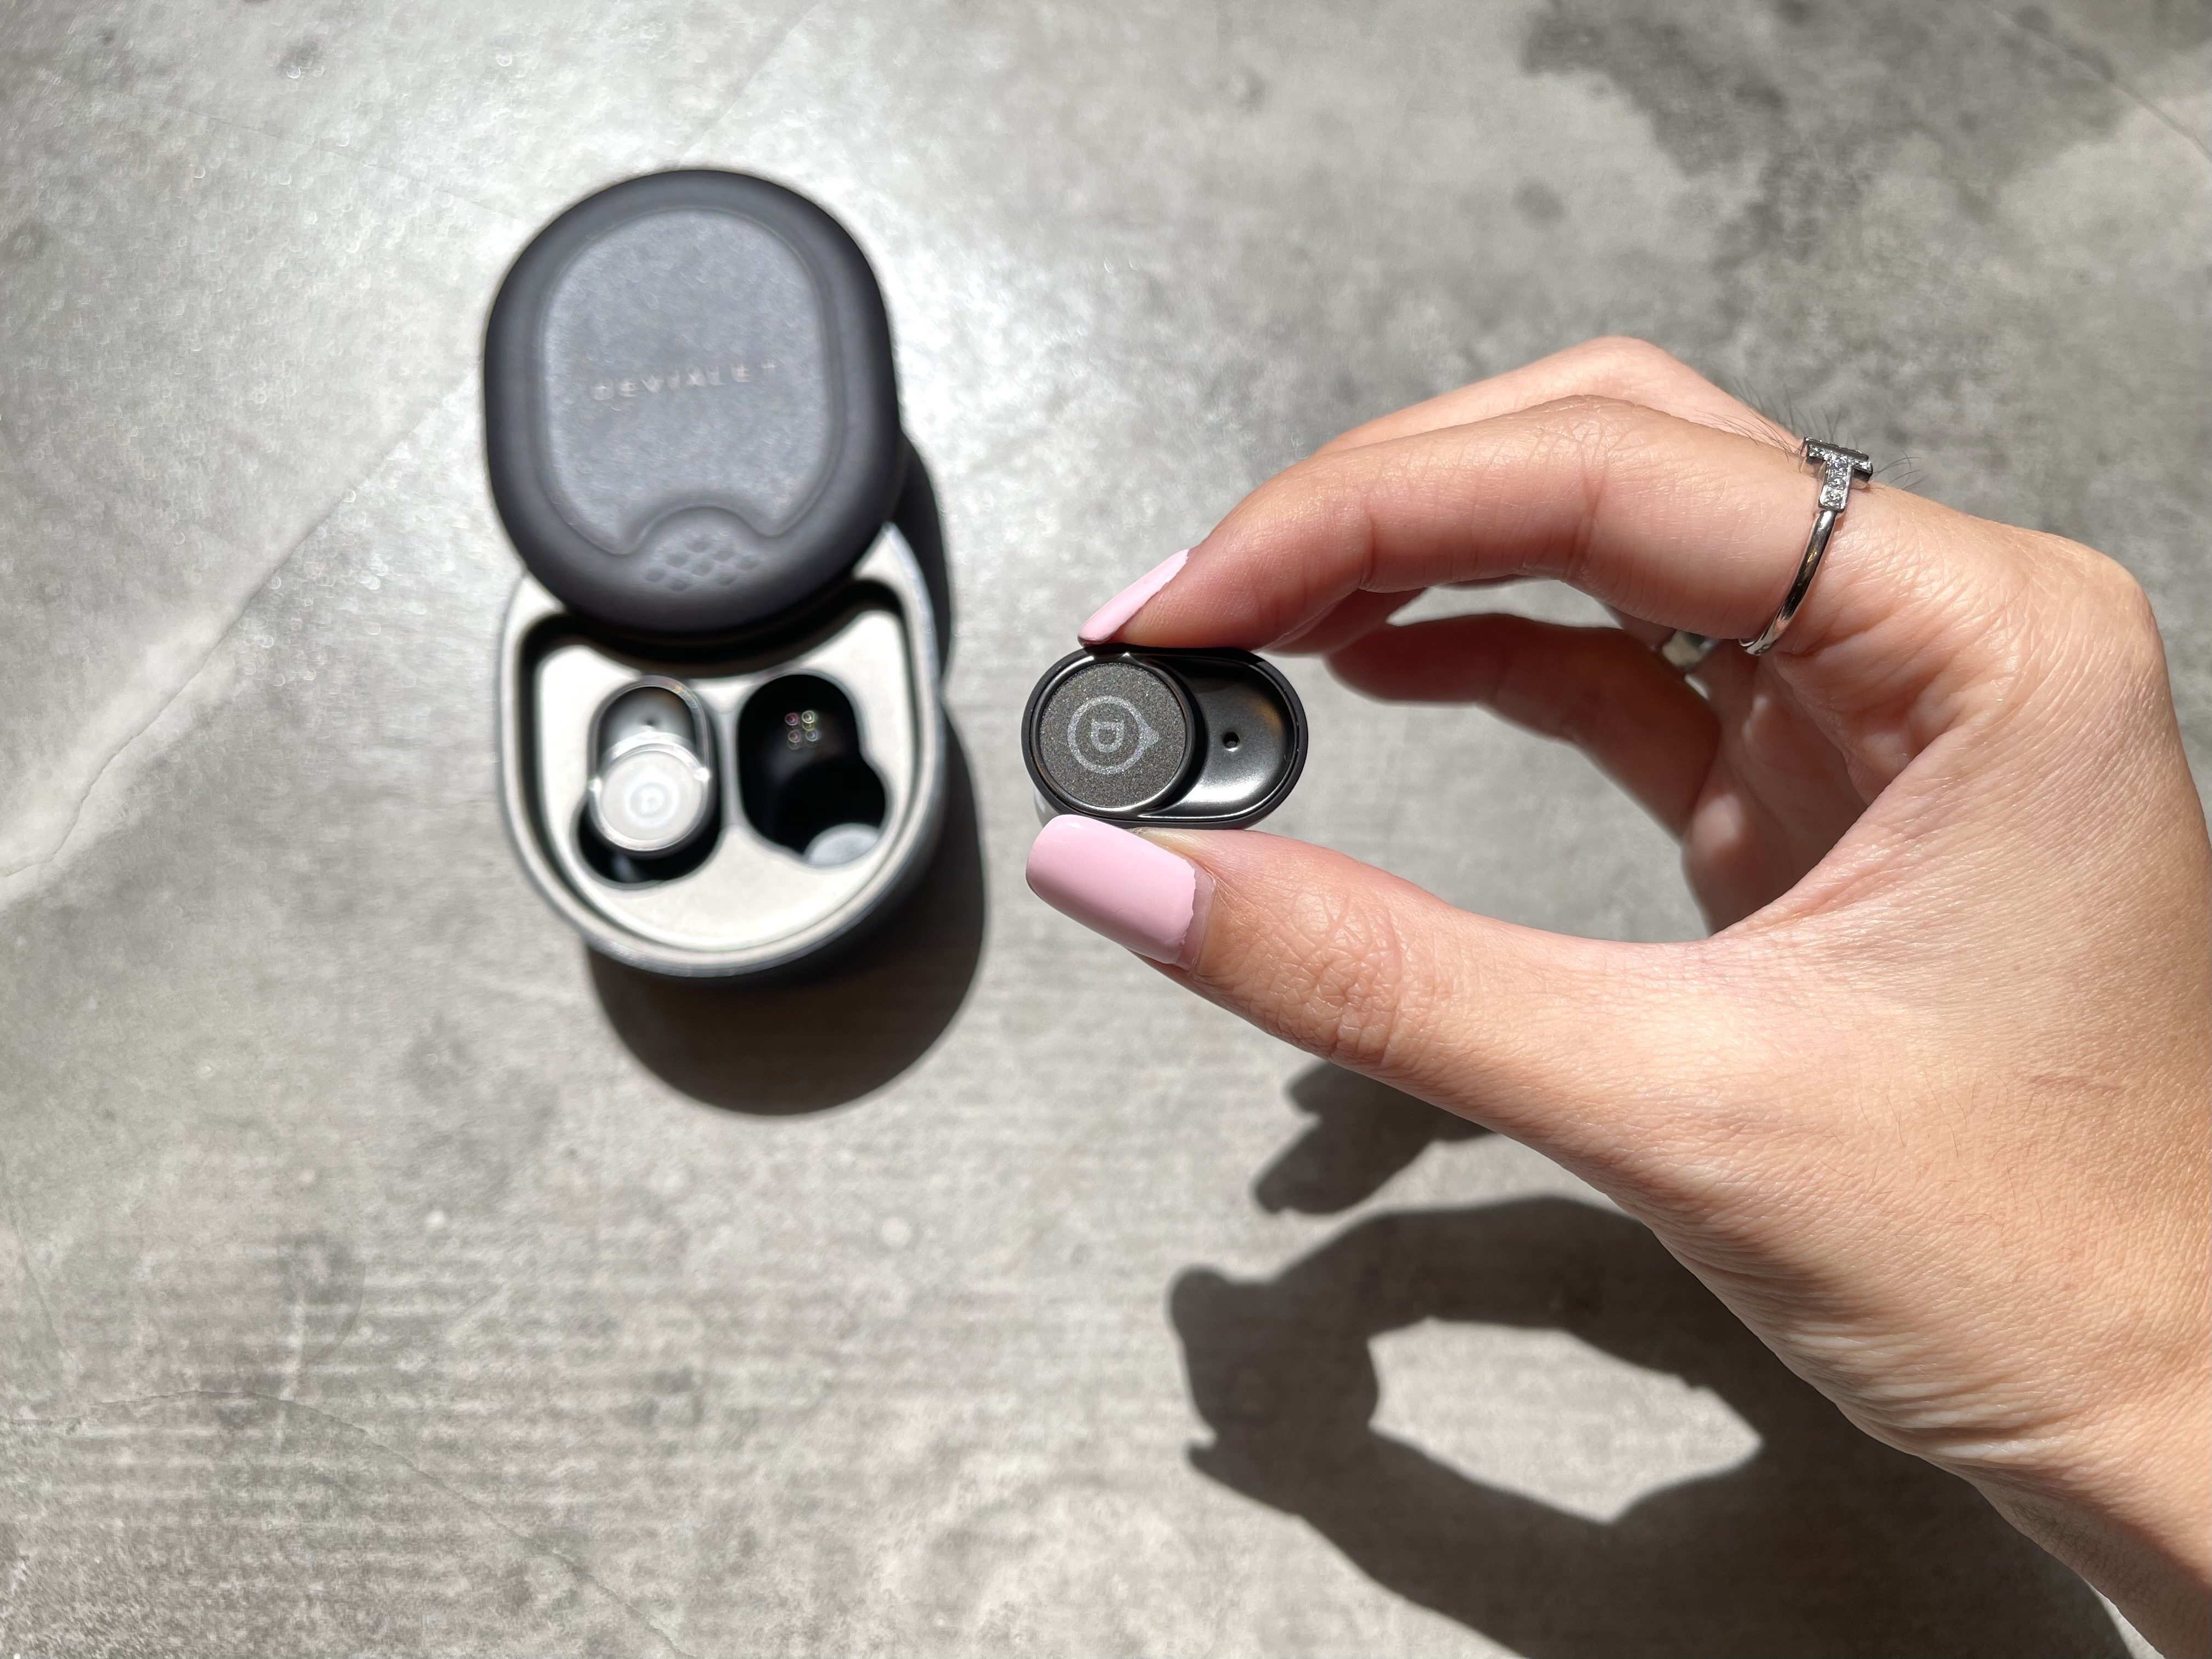 Devialet’s earbuds have a curved oval shape to them. Photo: STYLE